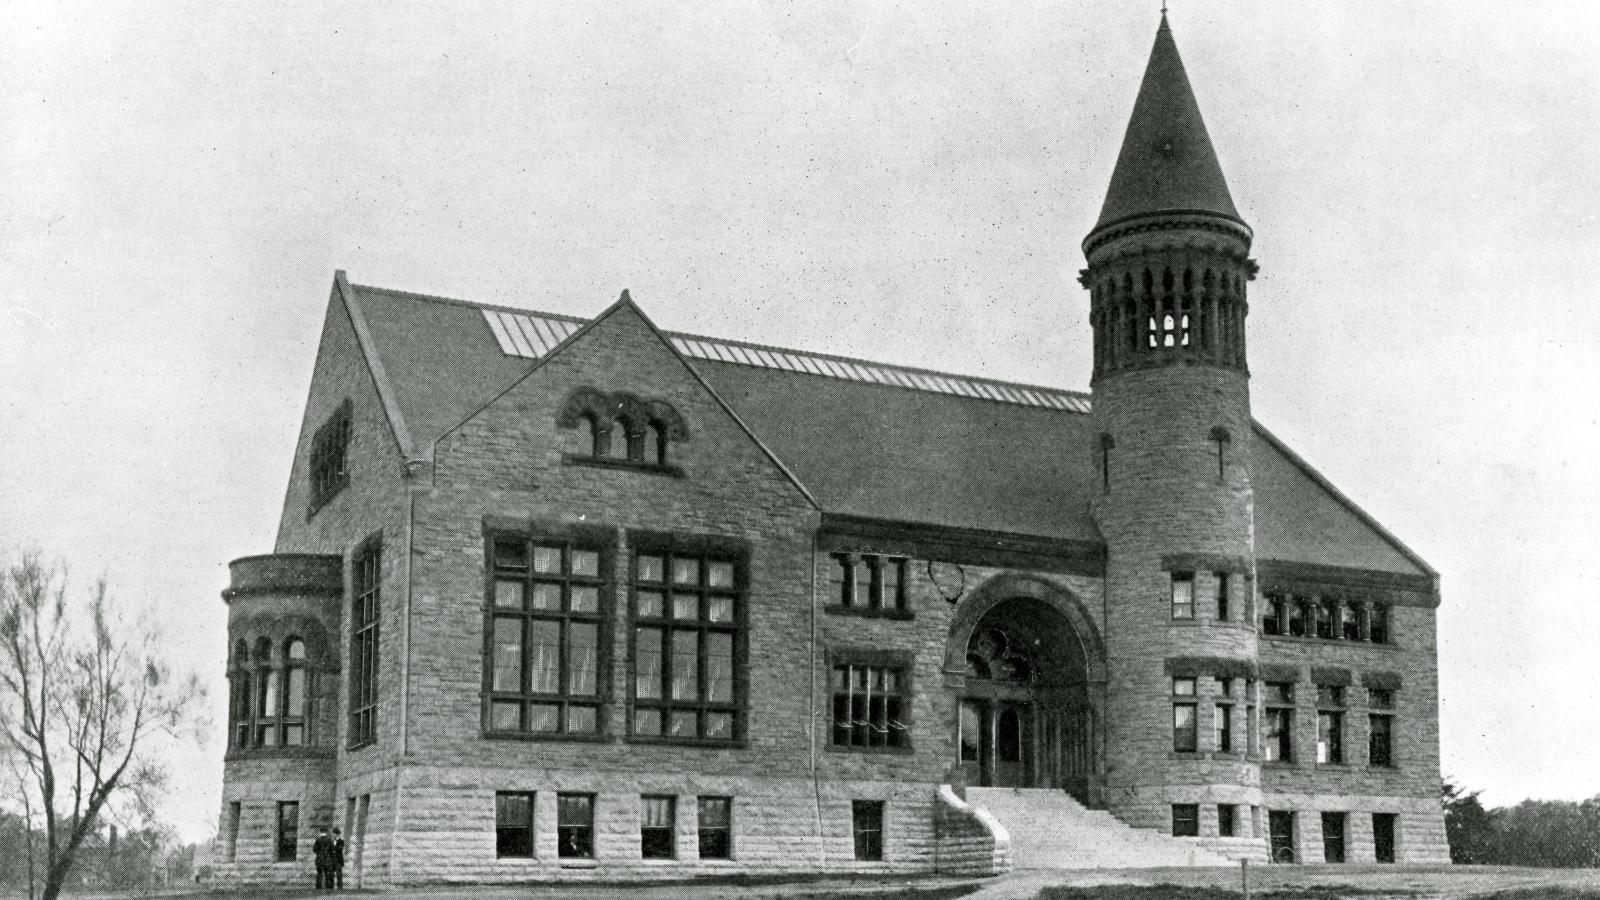 Black and white photo of Orton Hall from 1895